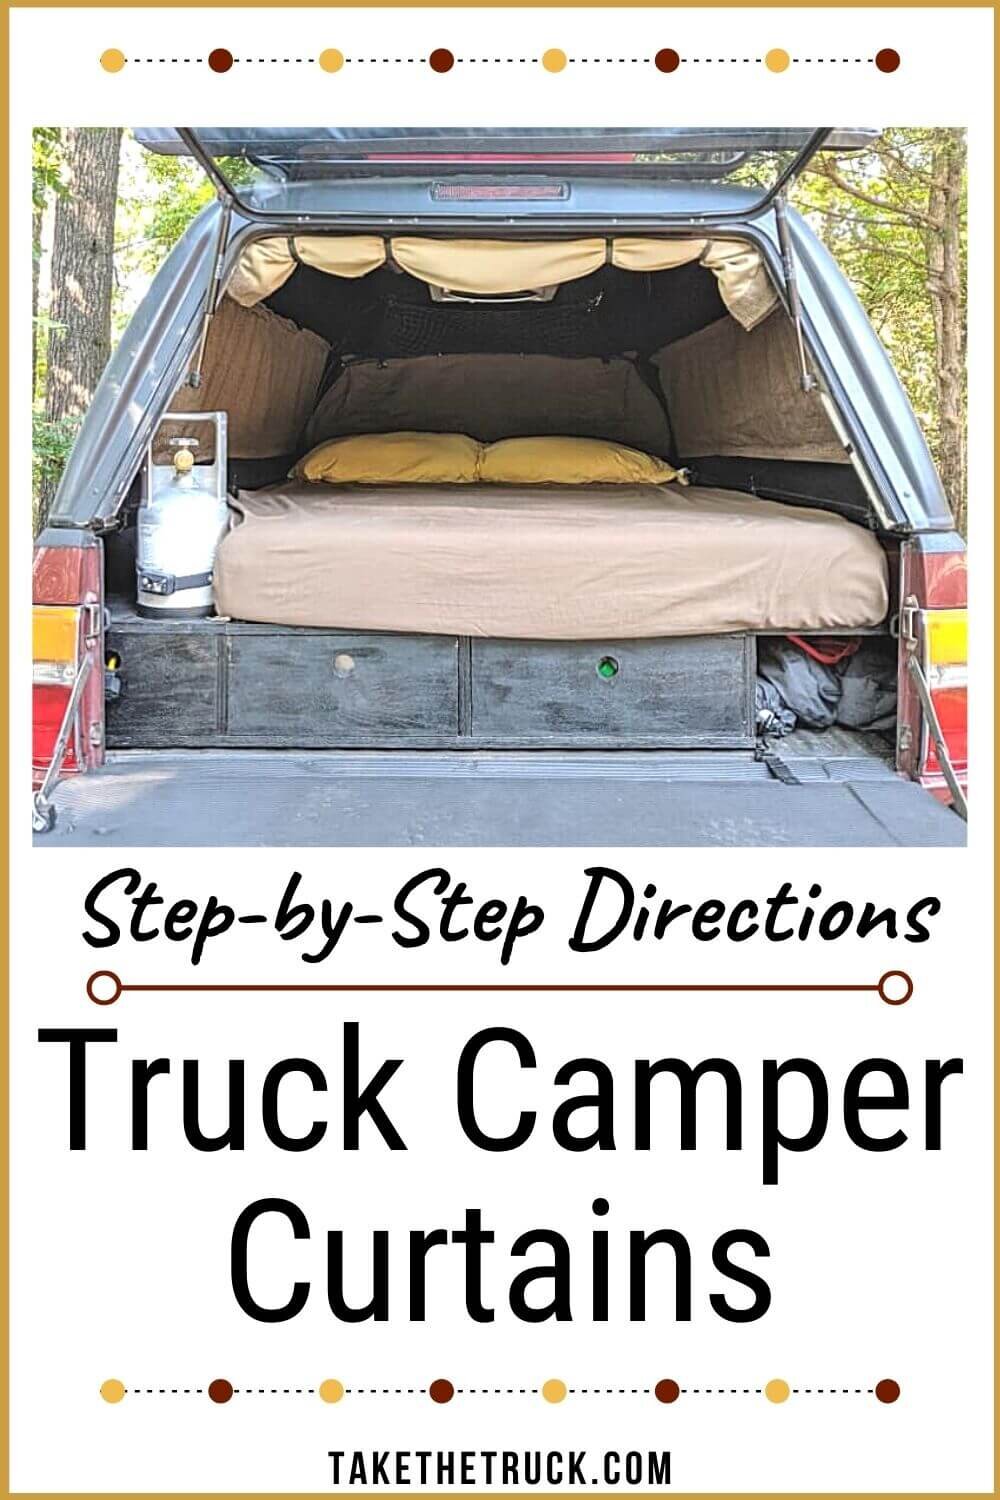 How to make DIY truck bed curtains.